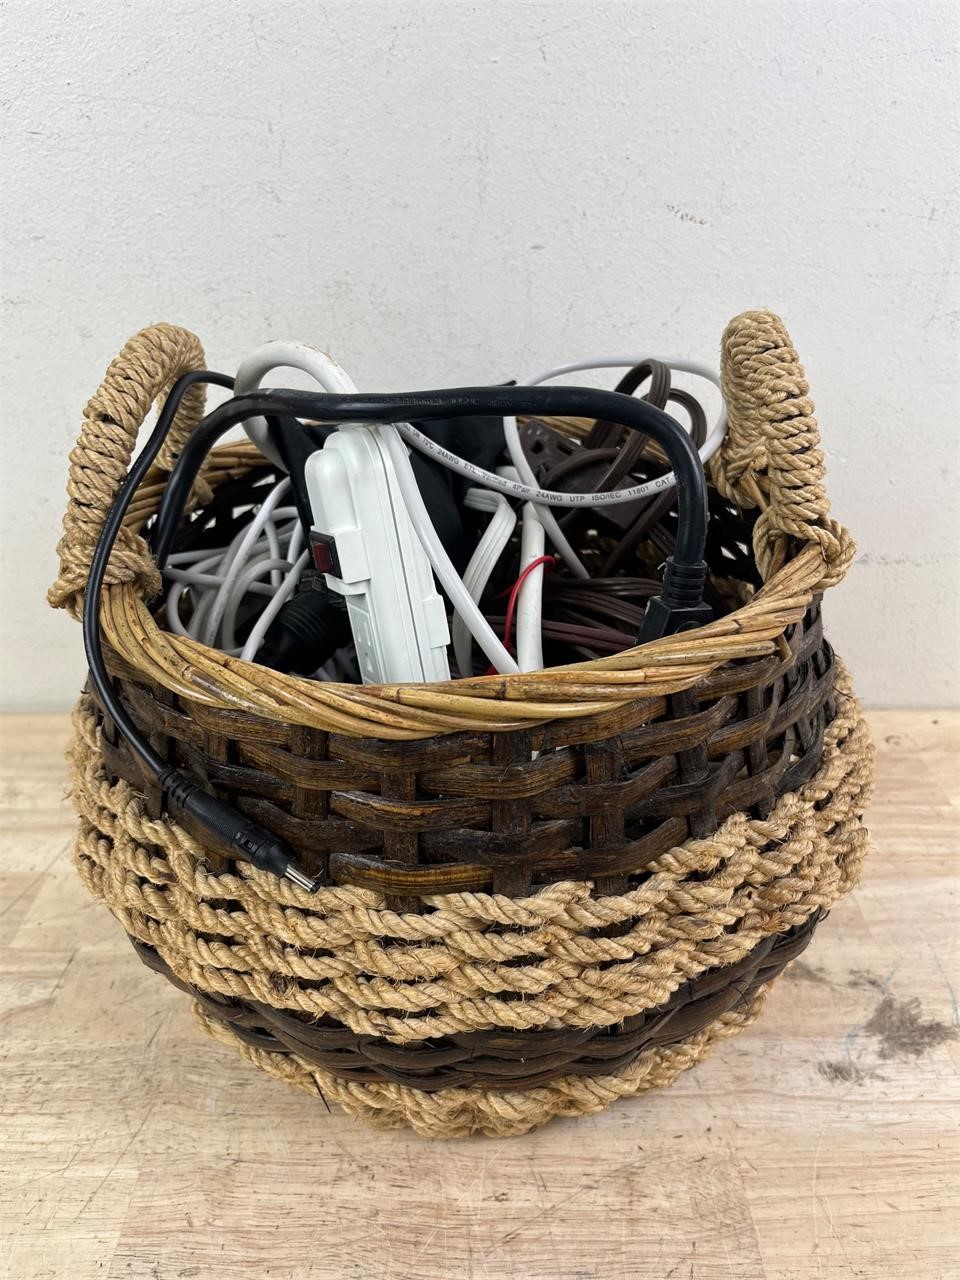 Lot of extension cords with basket